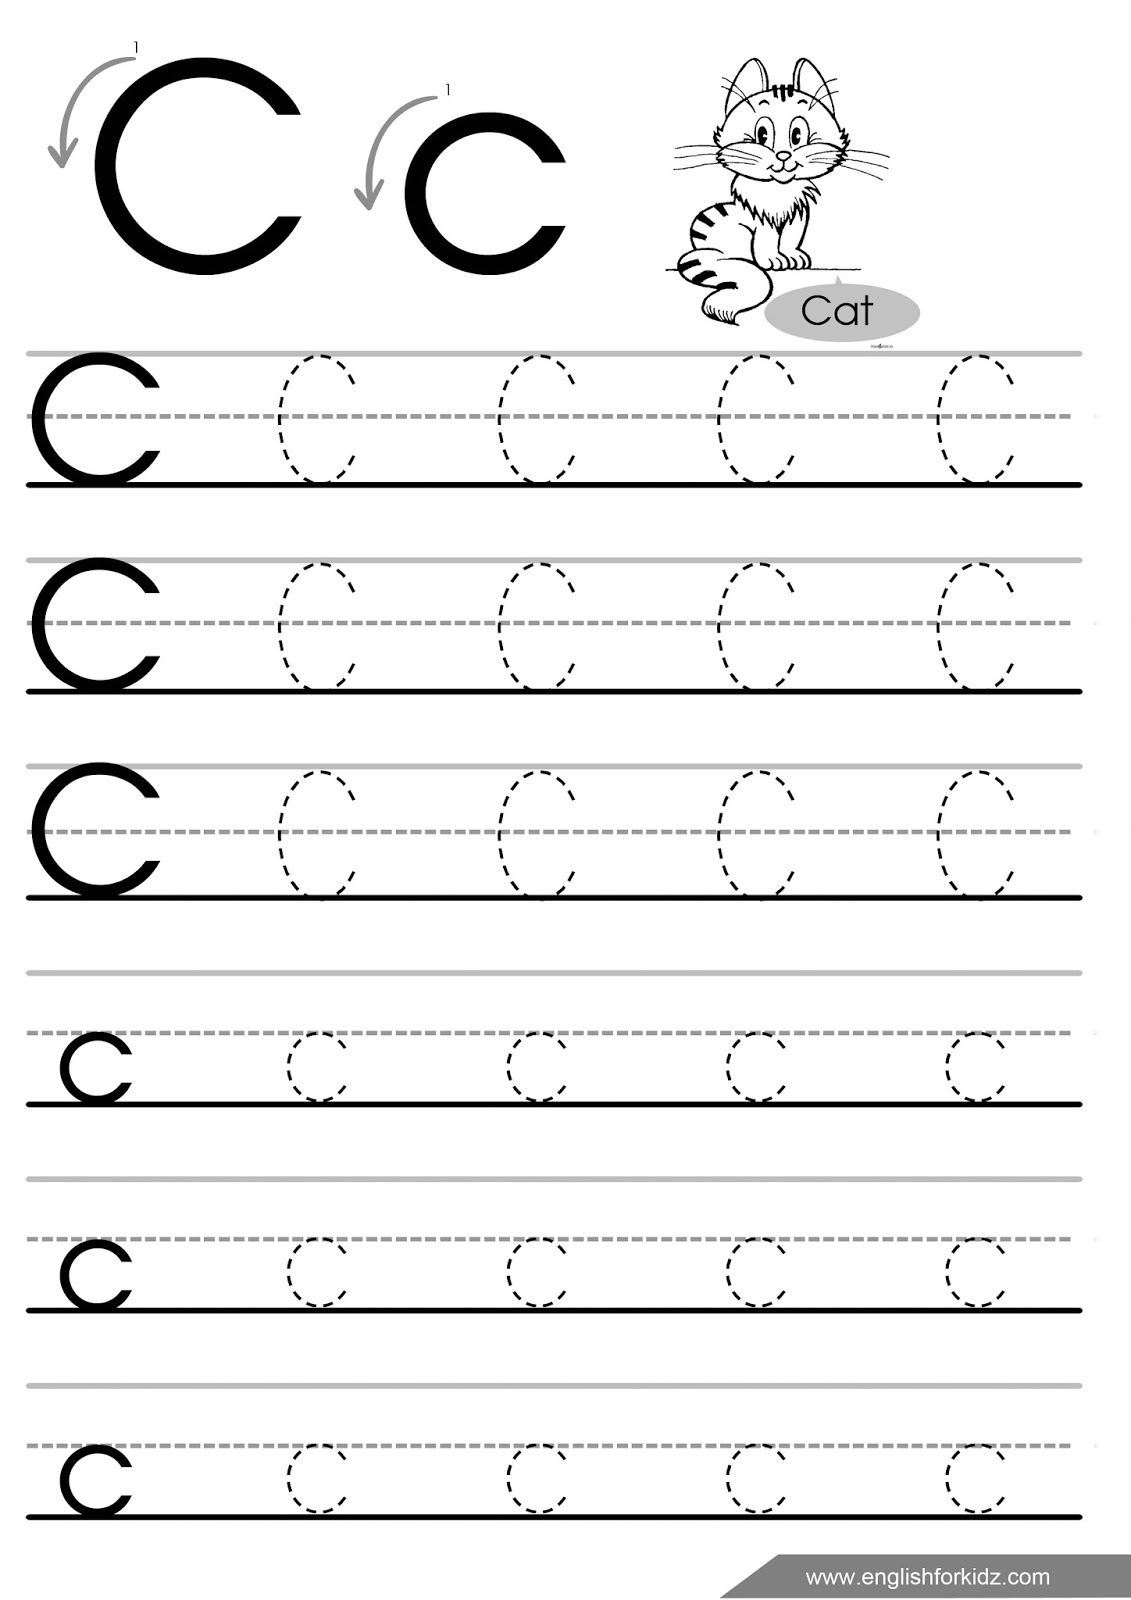 Tracing Letter C Worksheets The Best Worksheets Image Collection